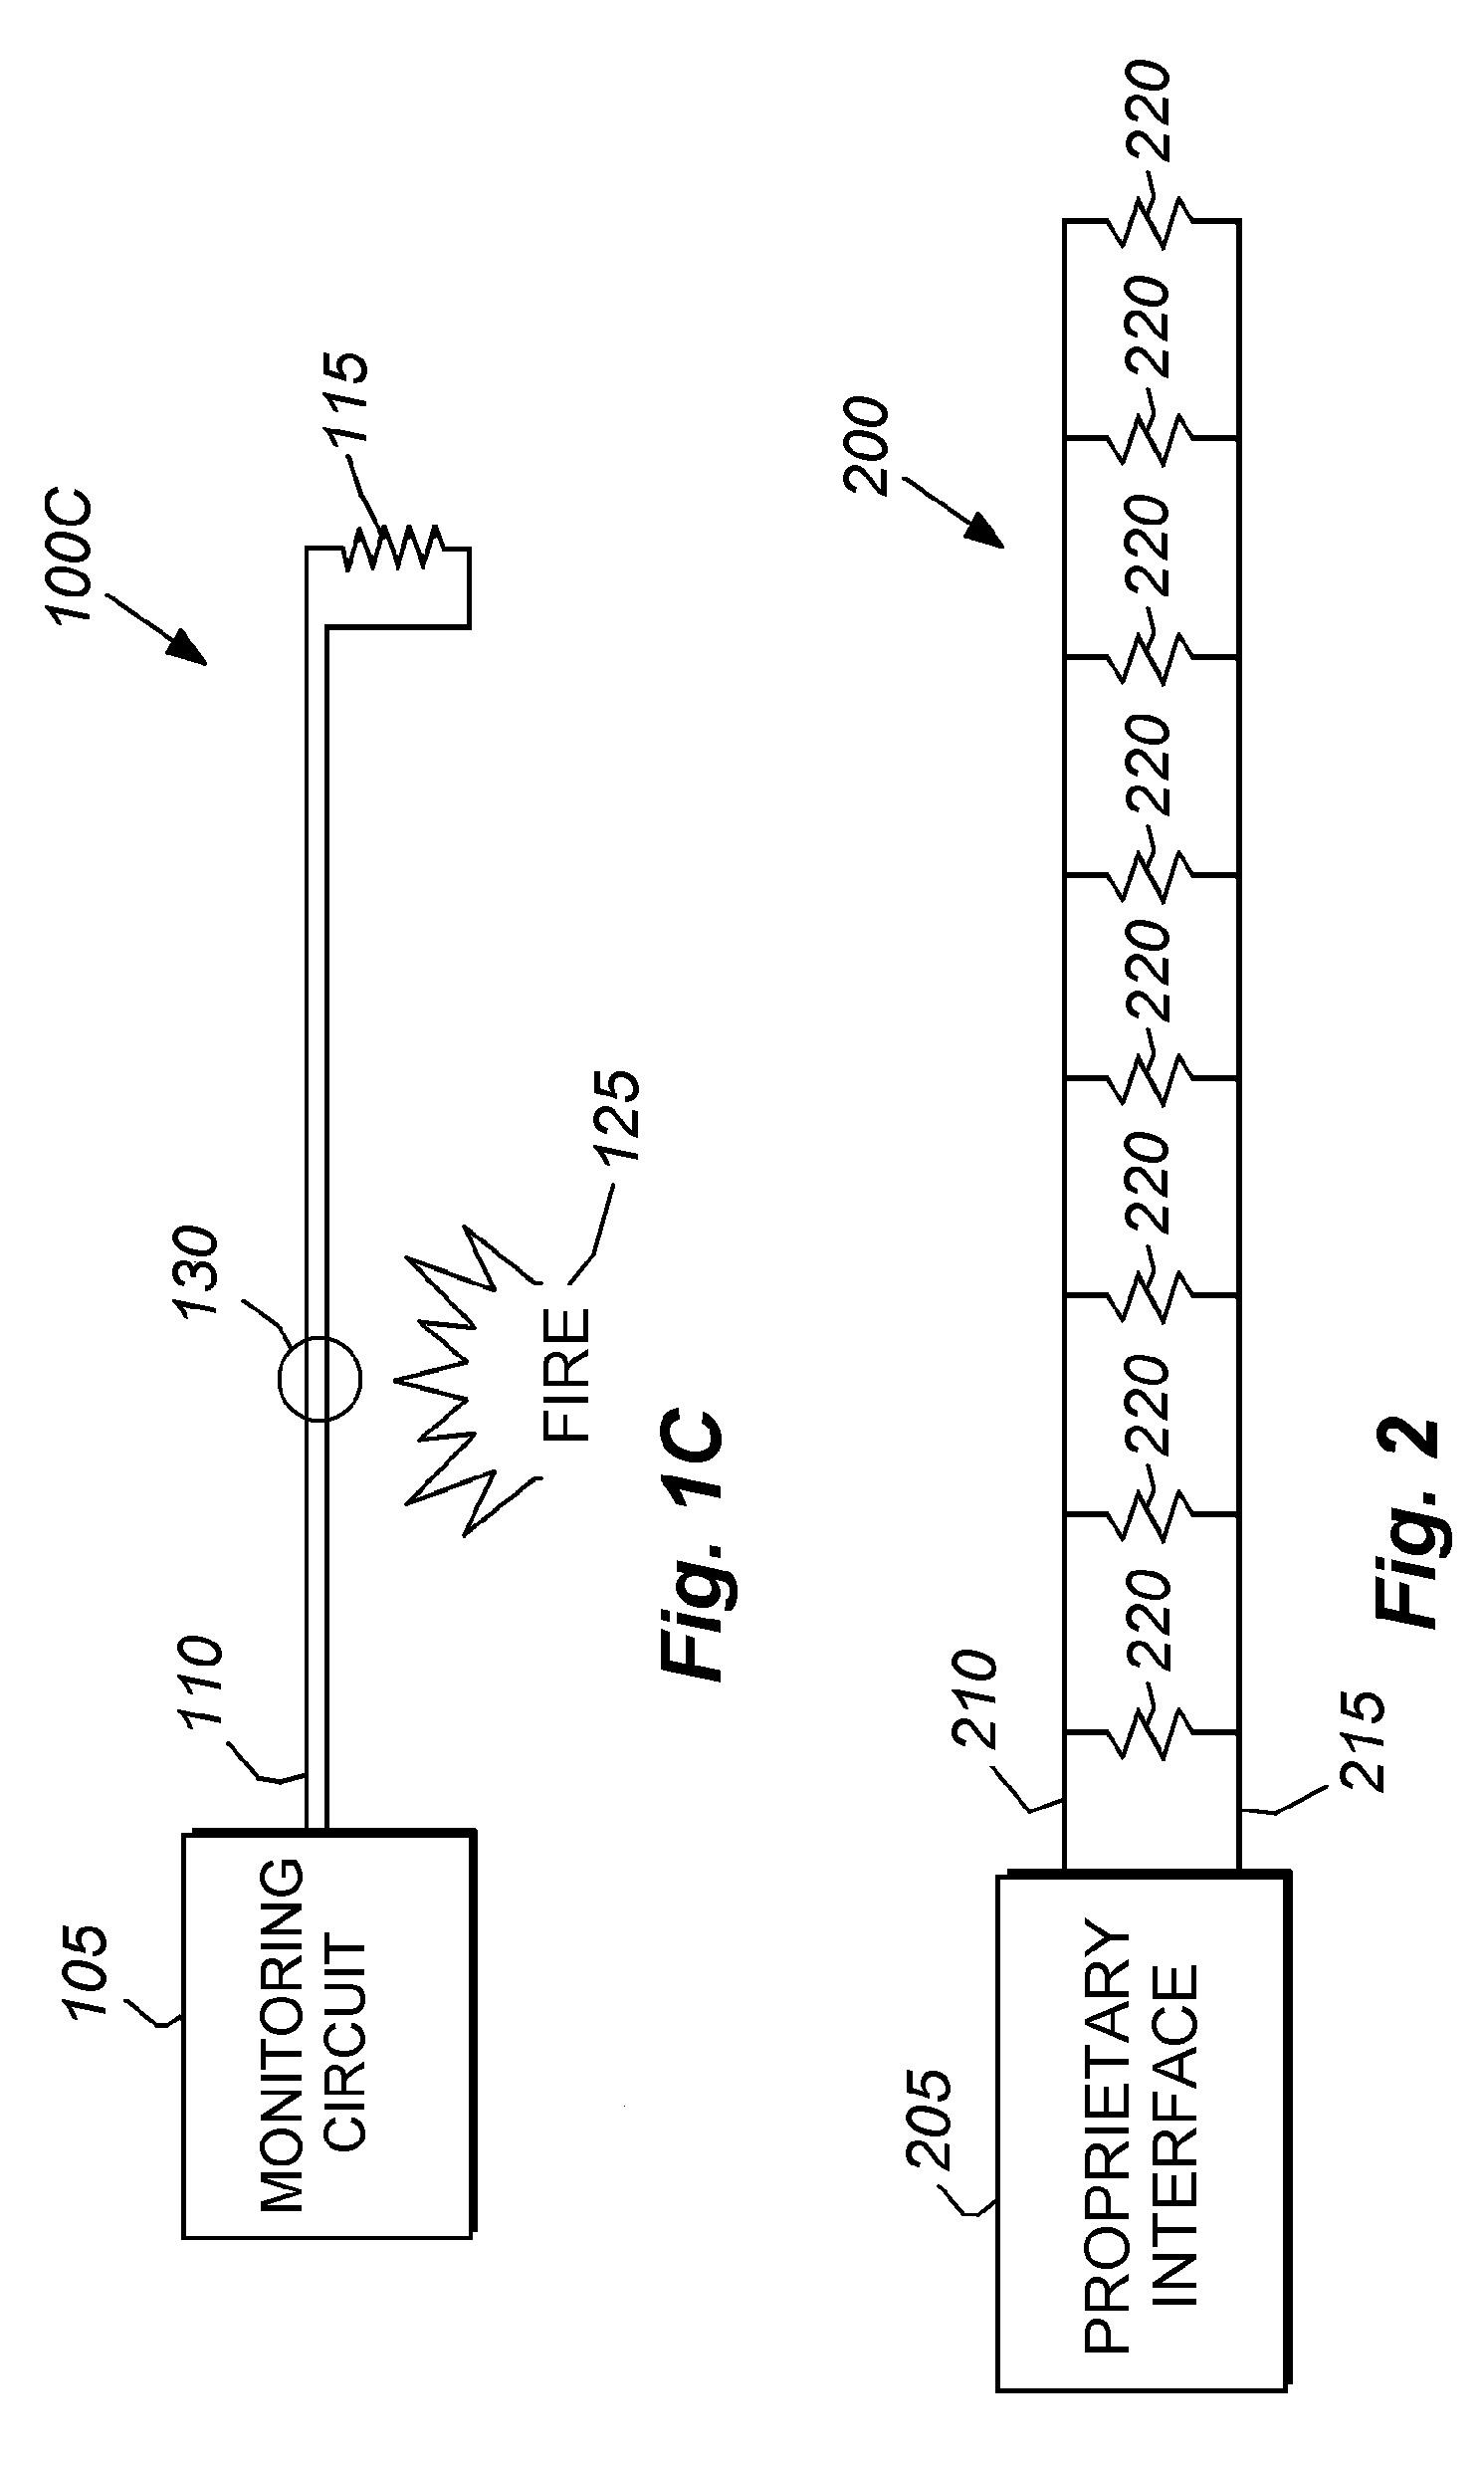 Digital linear heat detector with thermal activation confirmation